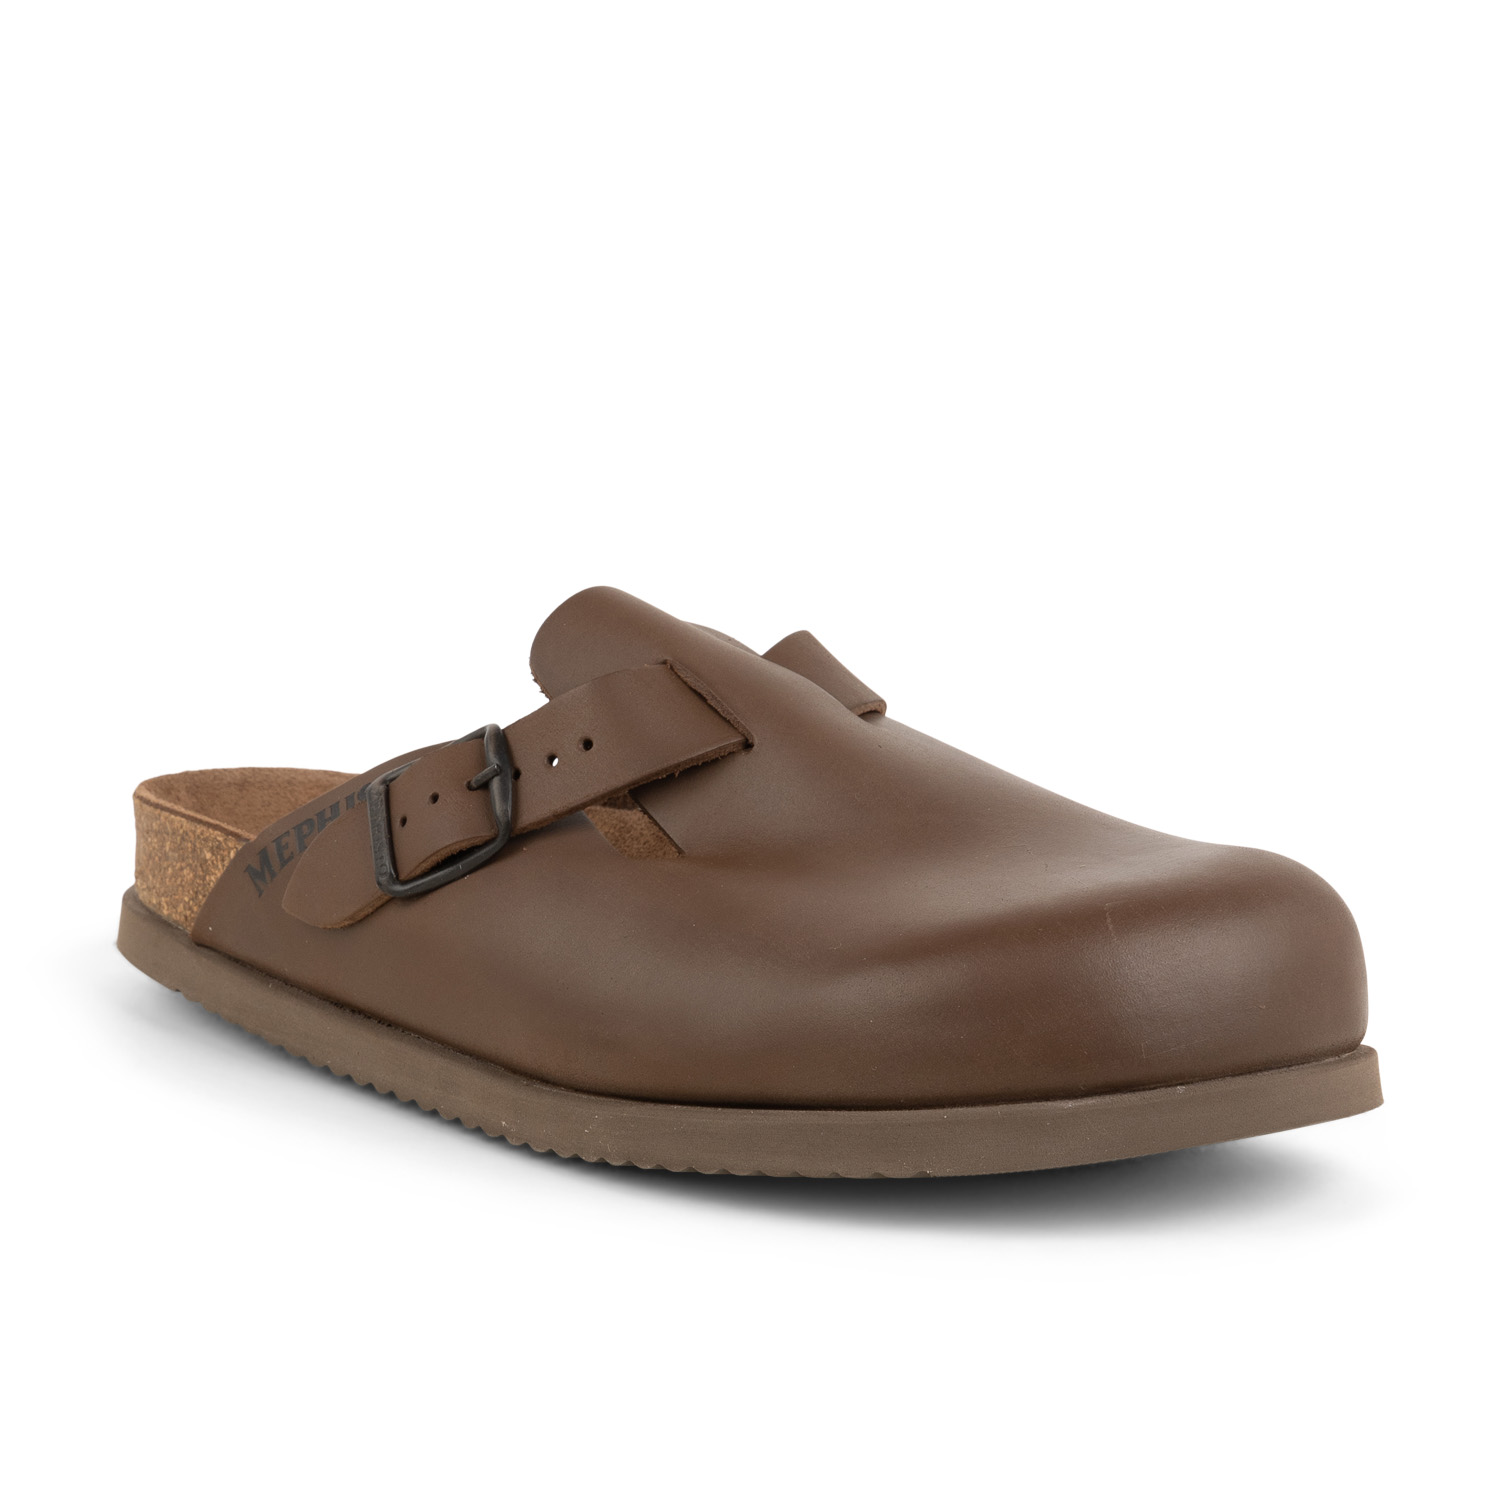 02 - NATHAN - MEPHISTO - Chaussons - Cuir